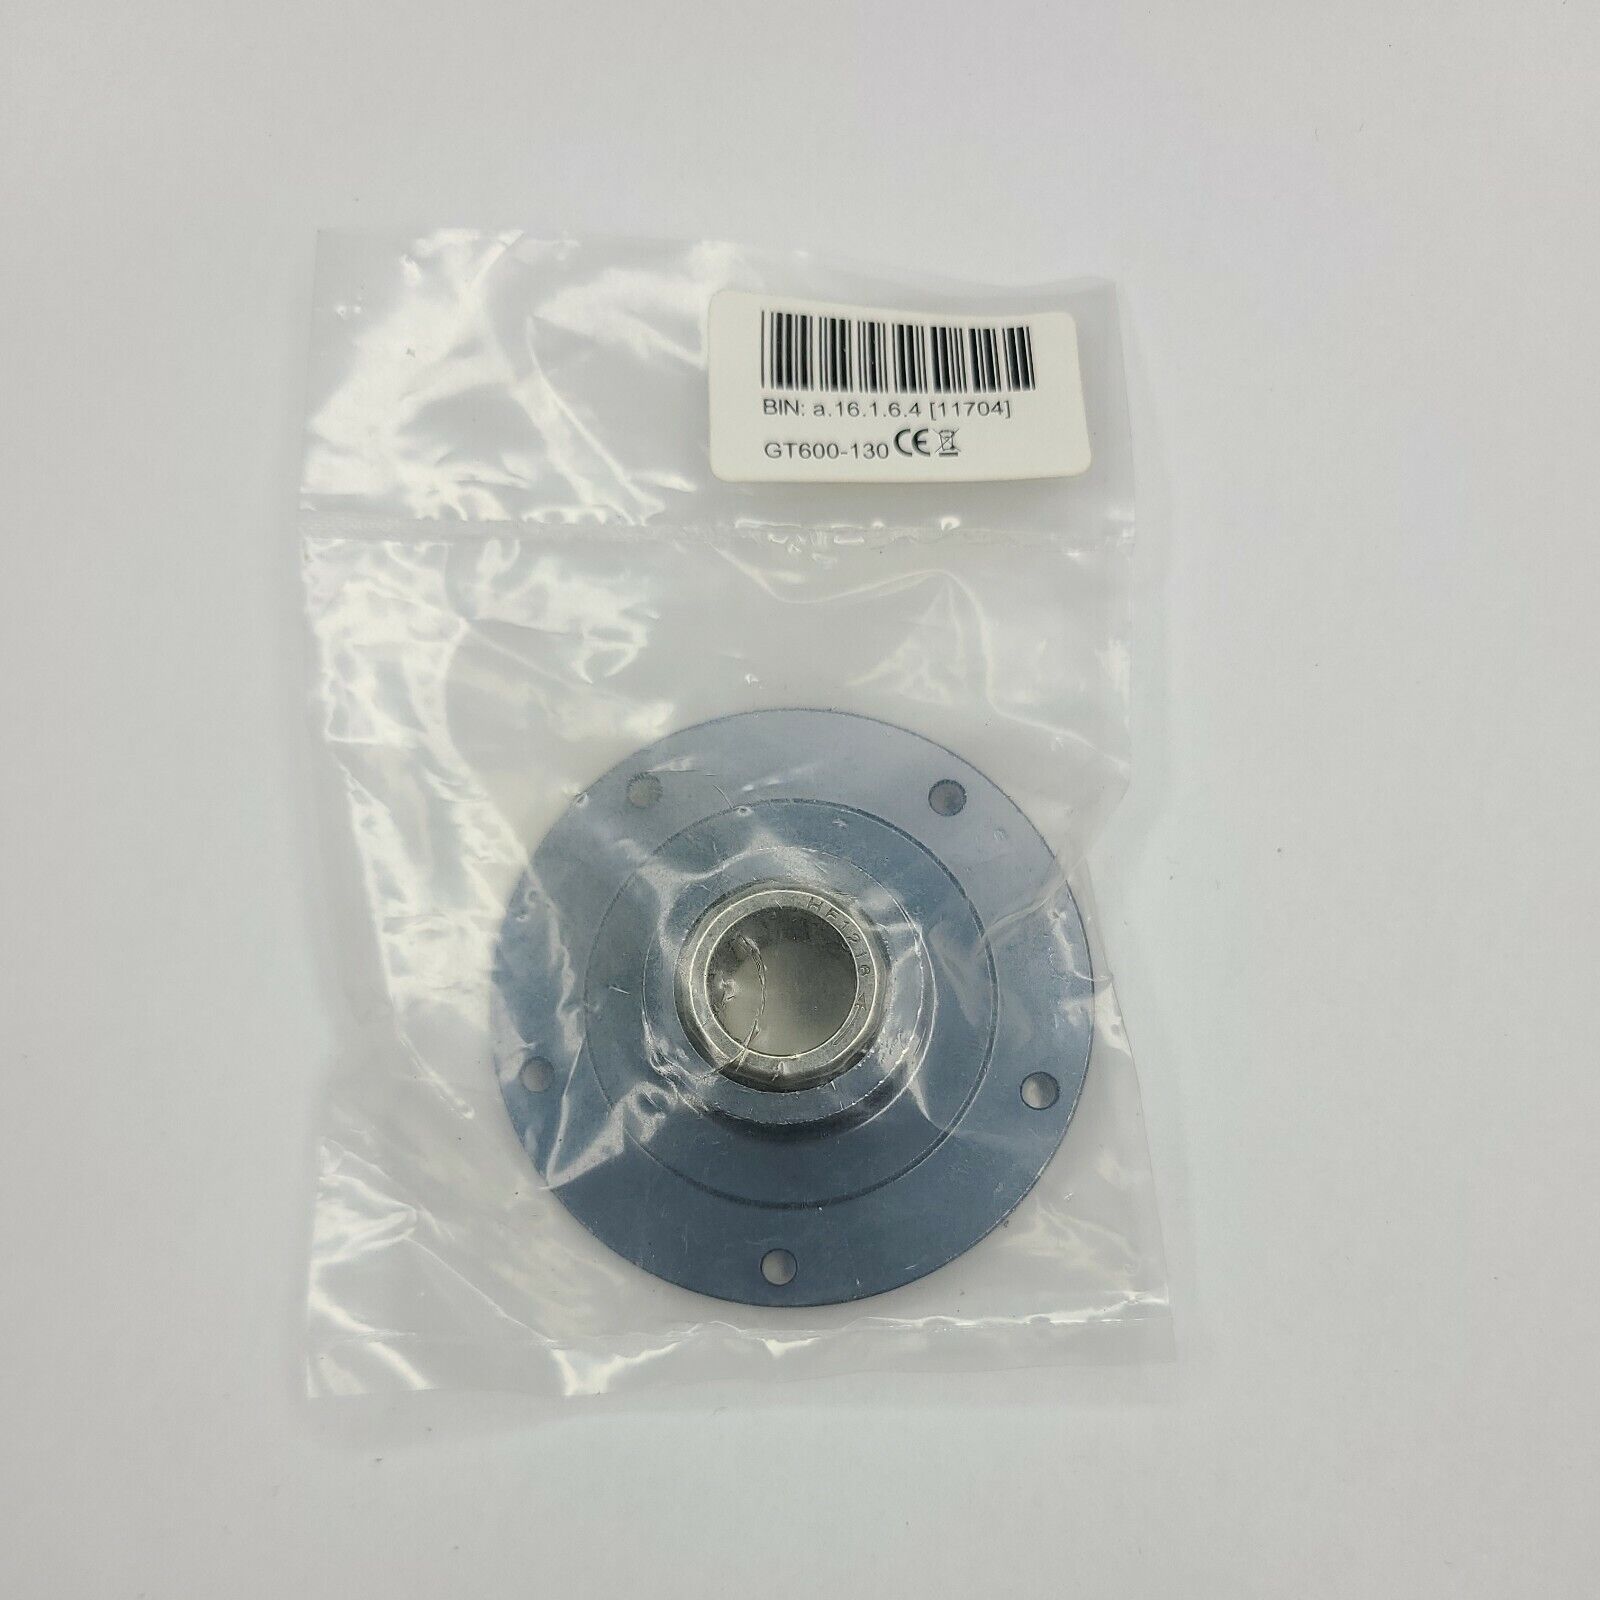 HK600GT one way bearing hold